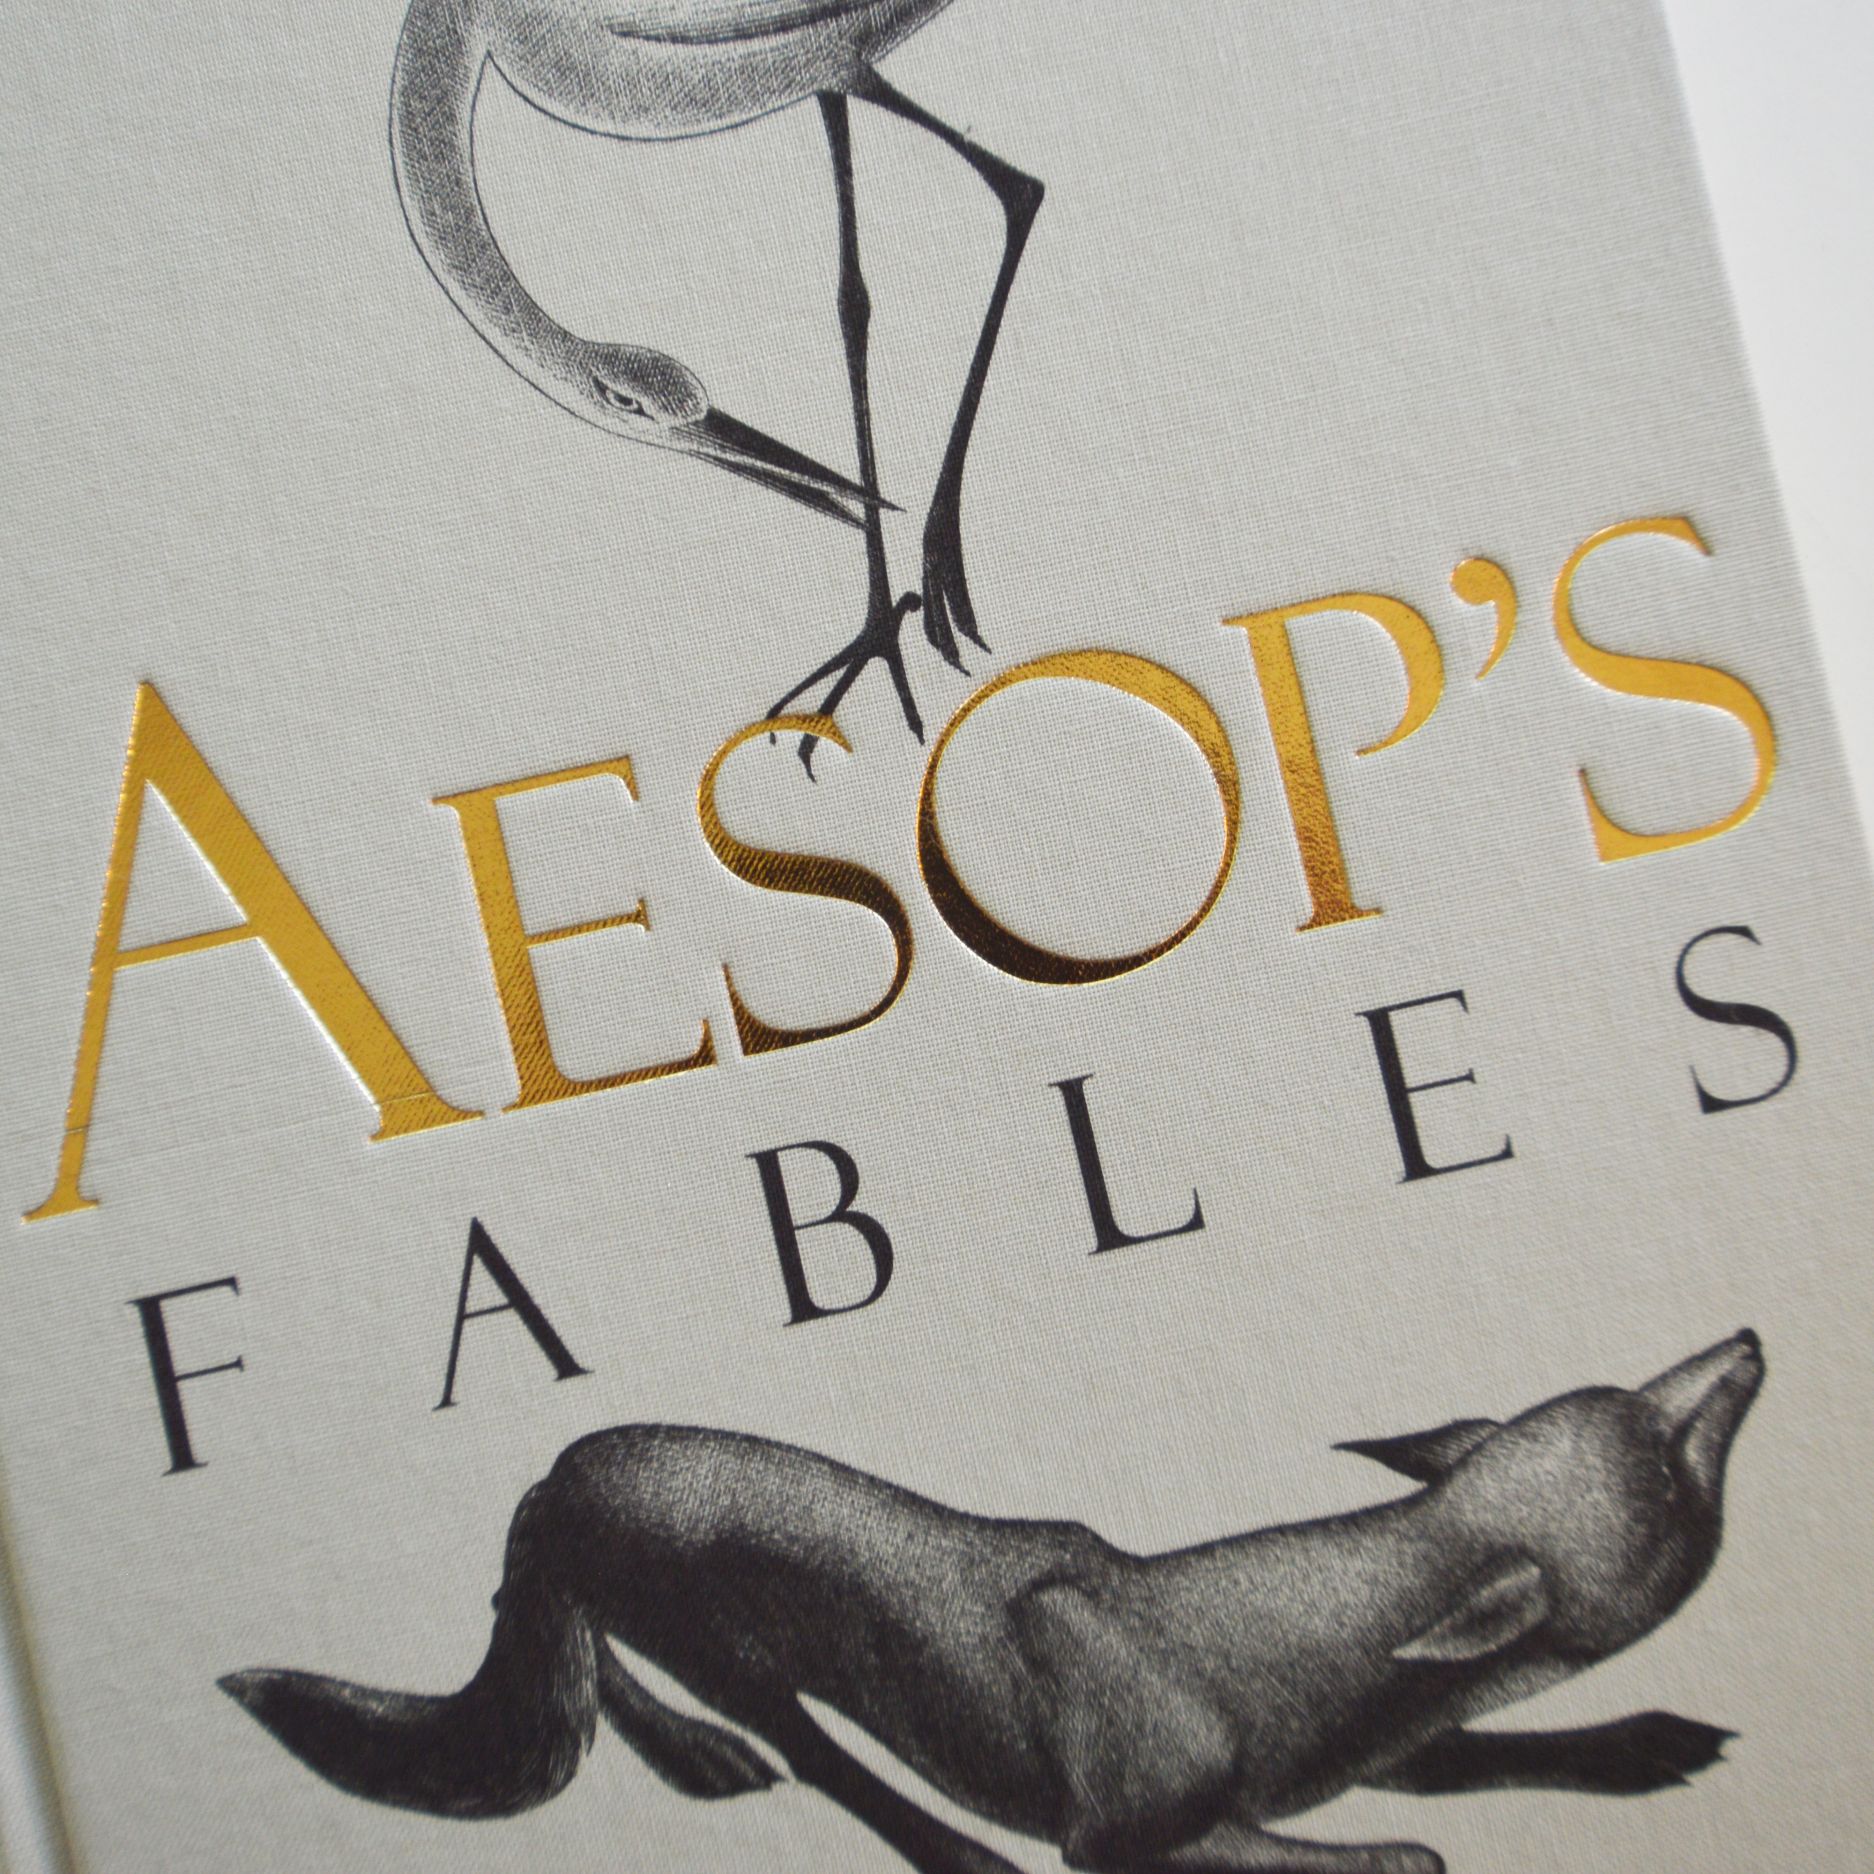 Aesops Fables 02 - click to open lightbox